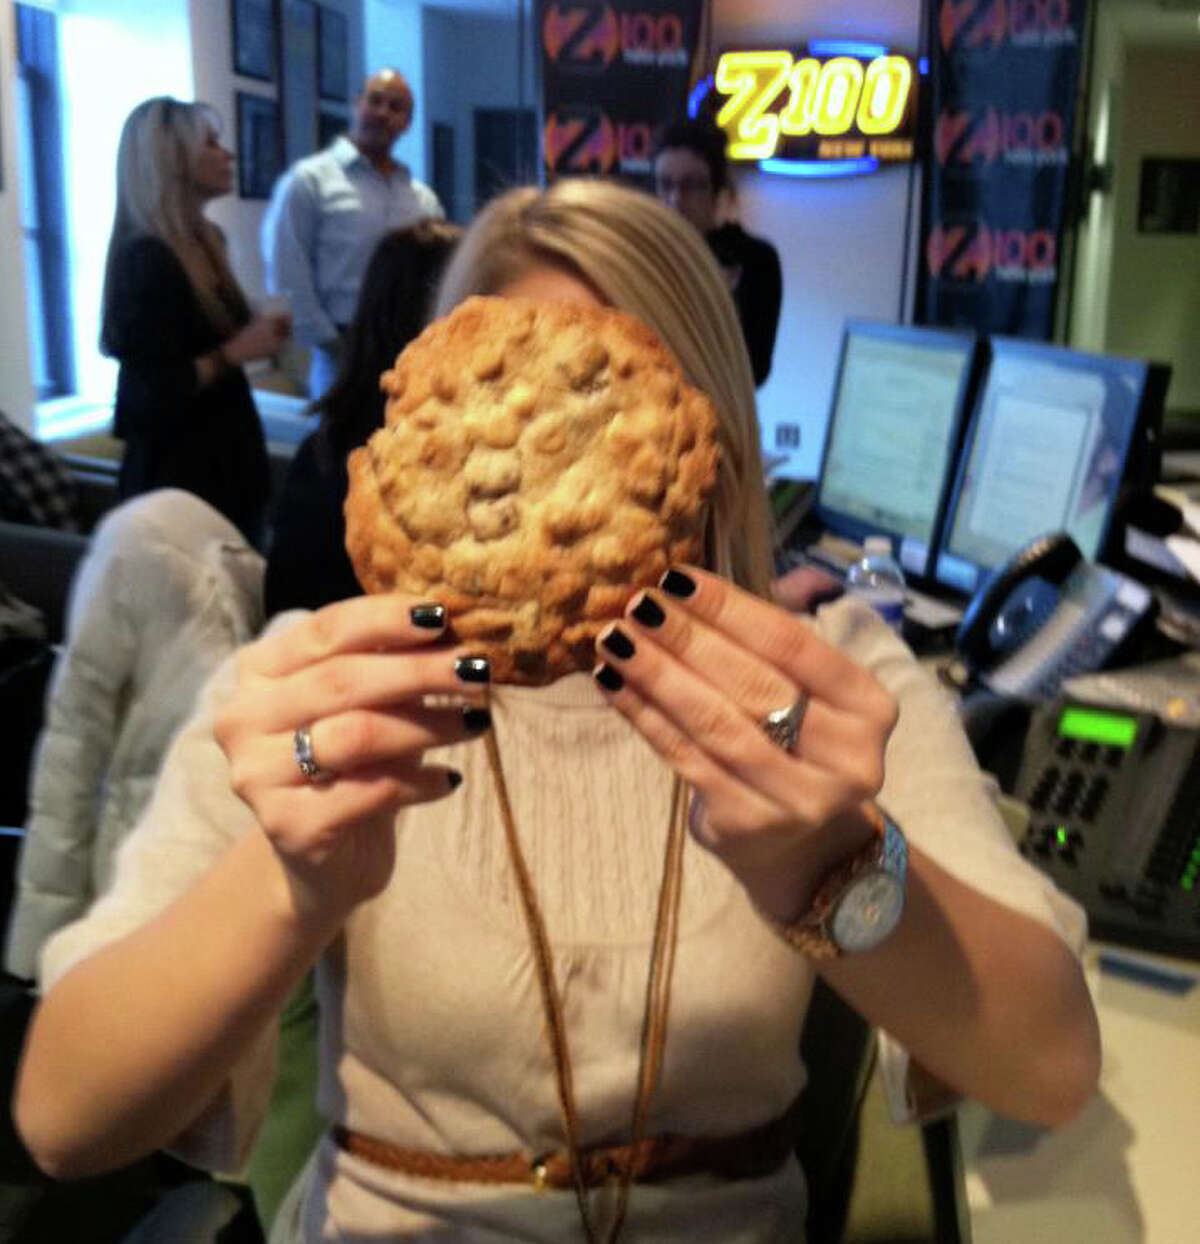 In this photo, Carla Marie from Elvis Duran and the Morning Show holds up a "Tripple Threat" Loopie Doops cookie. Photo courtesy of Elvis Duran and the Morning Show's Facebook page.